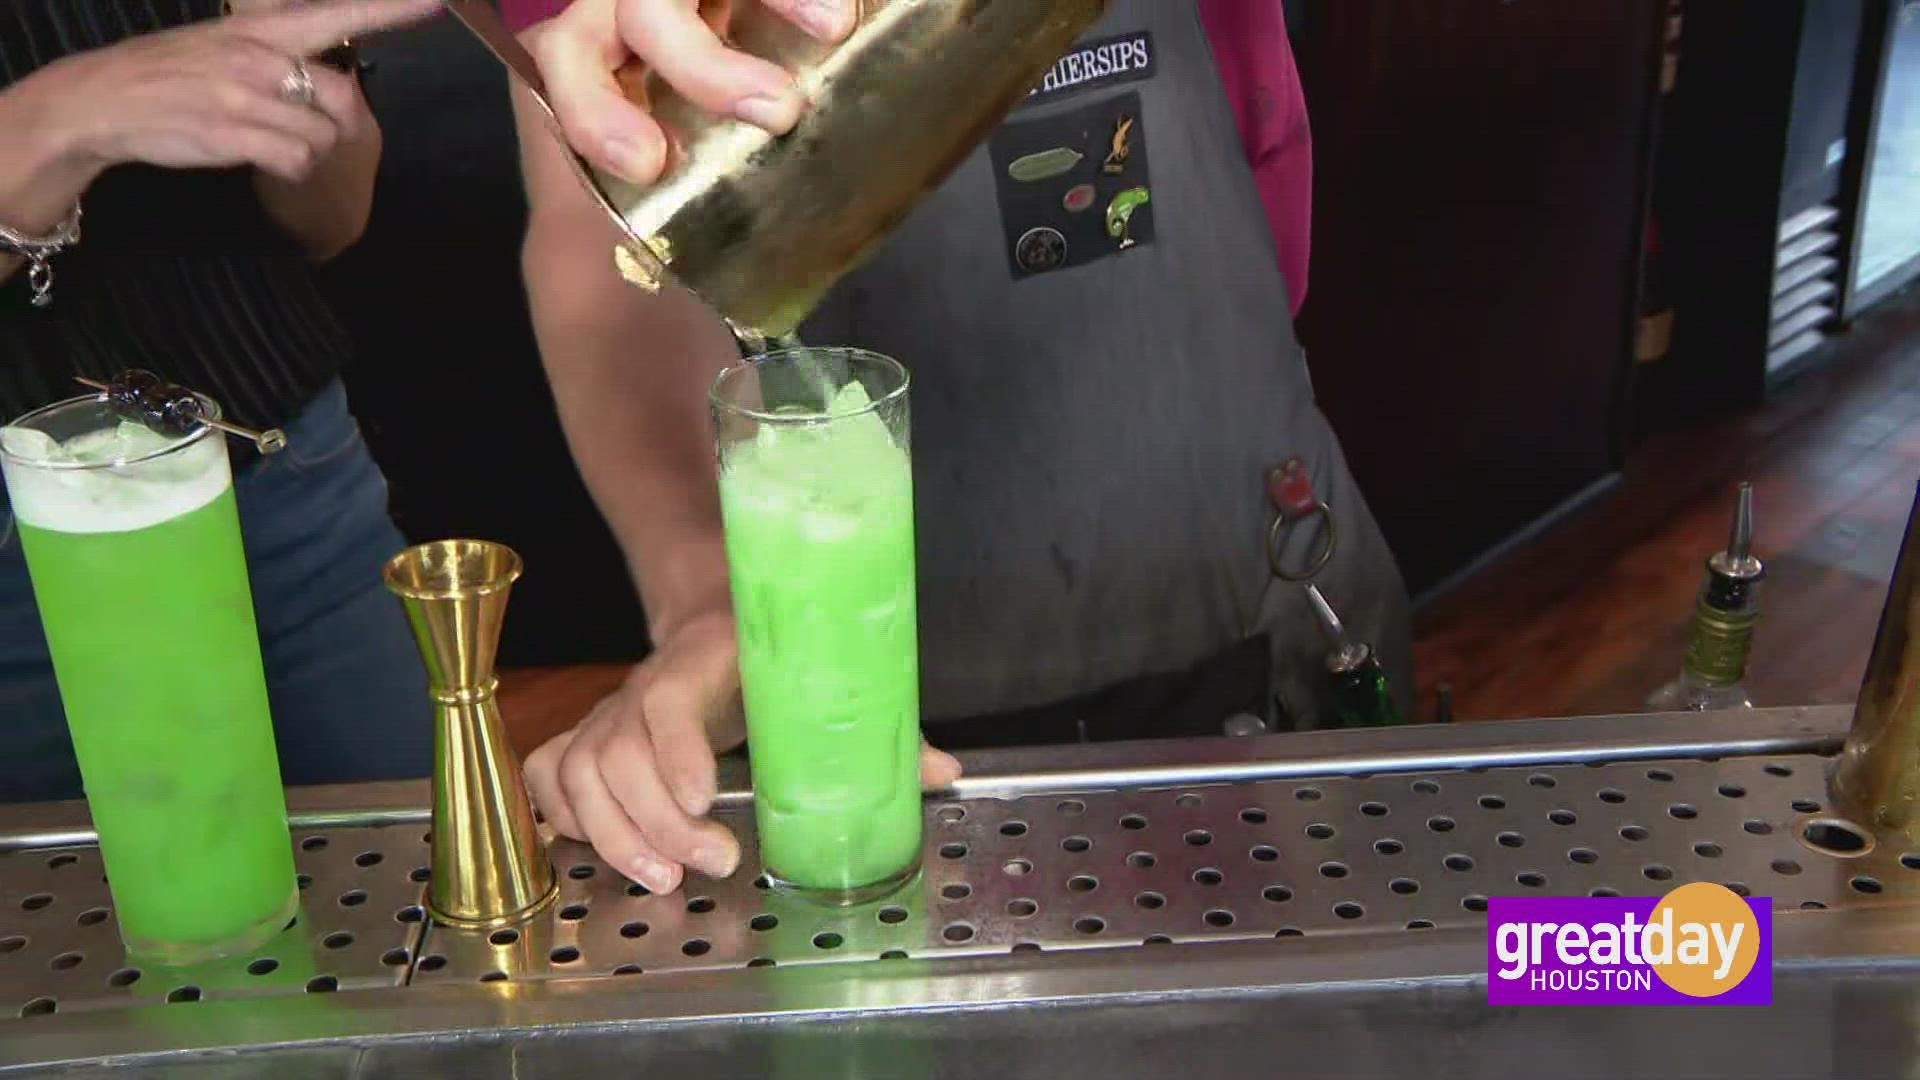 Say cheers to making spooky cocktails from one of Houston's hottest bars!